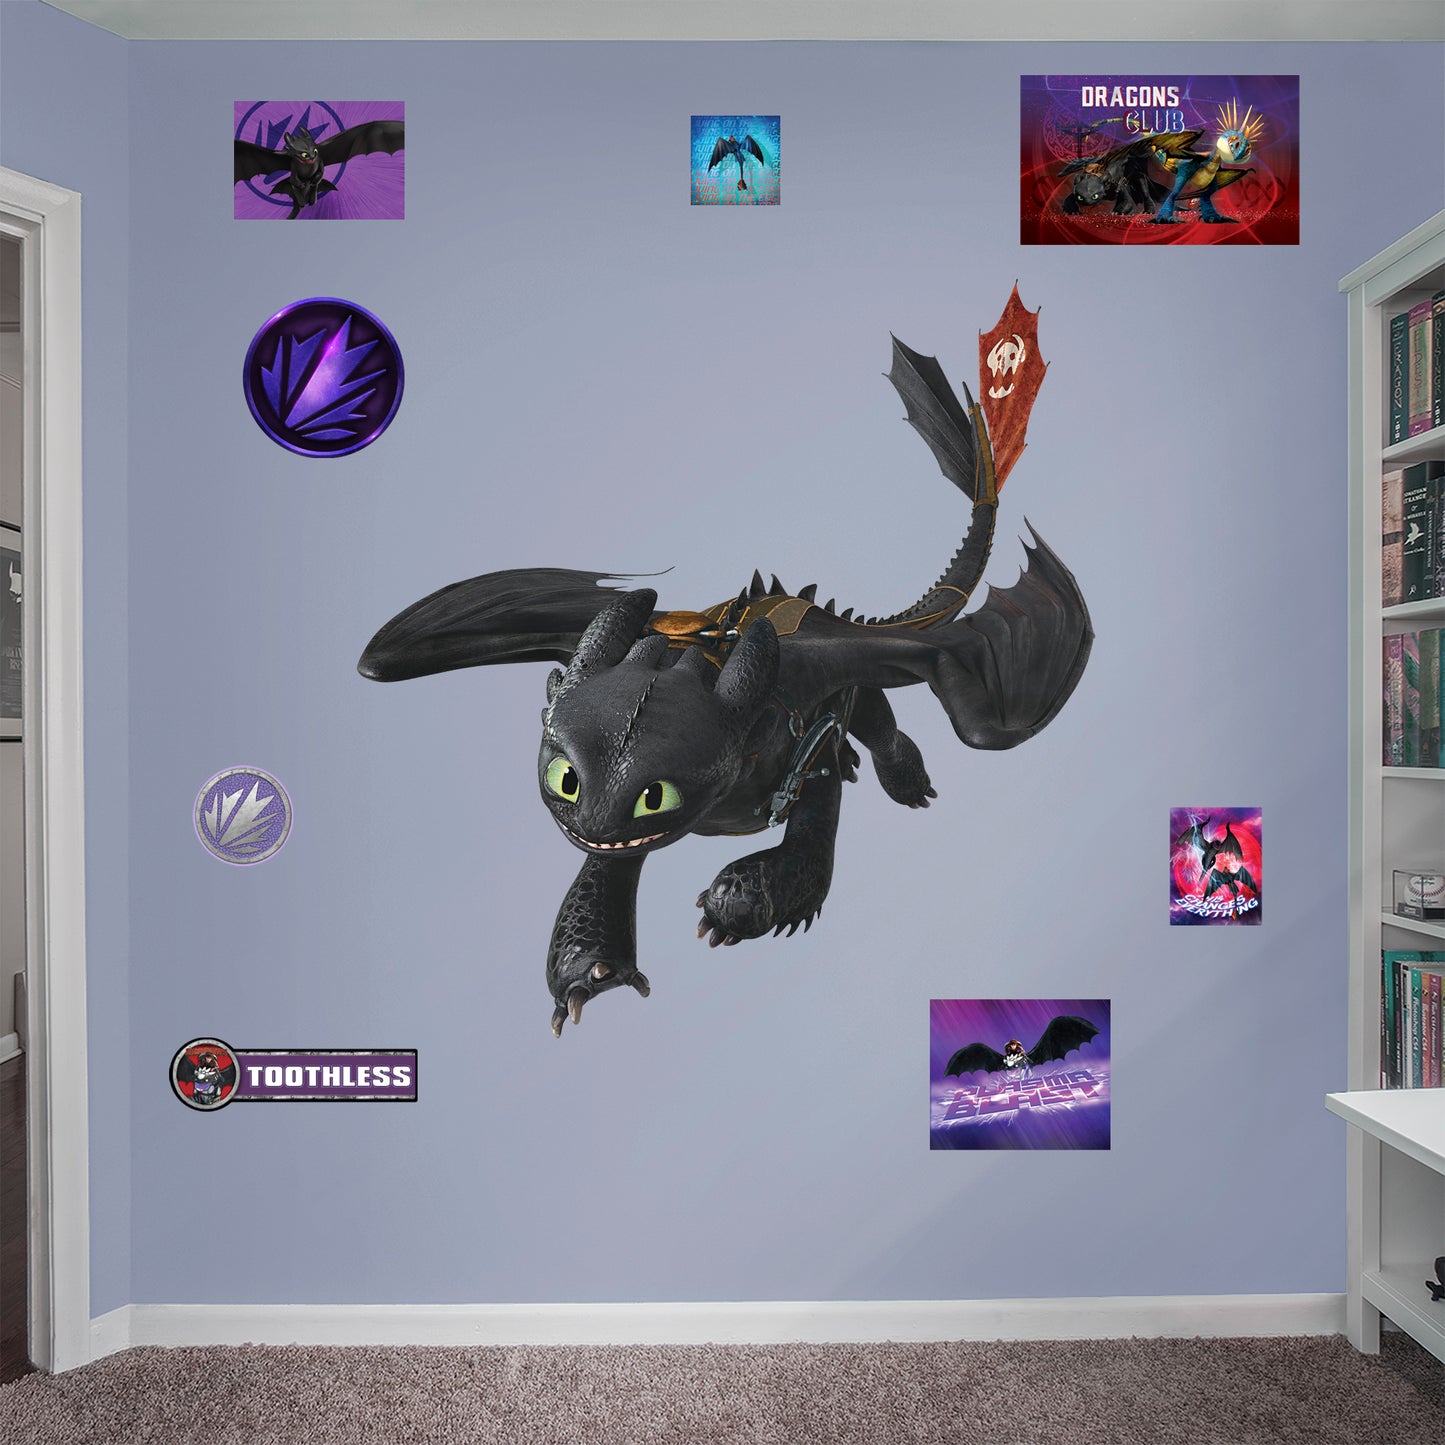 How to Train Your Dragon: Toothless RealBig        - Officially Licensed NBC Universal Removable Wall   Adhesive Decal